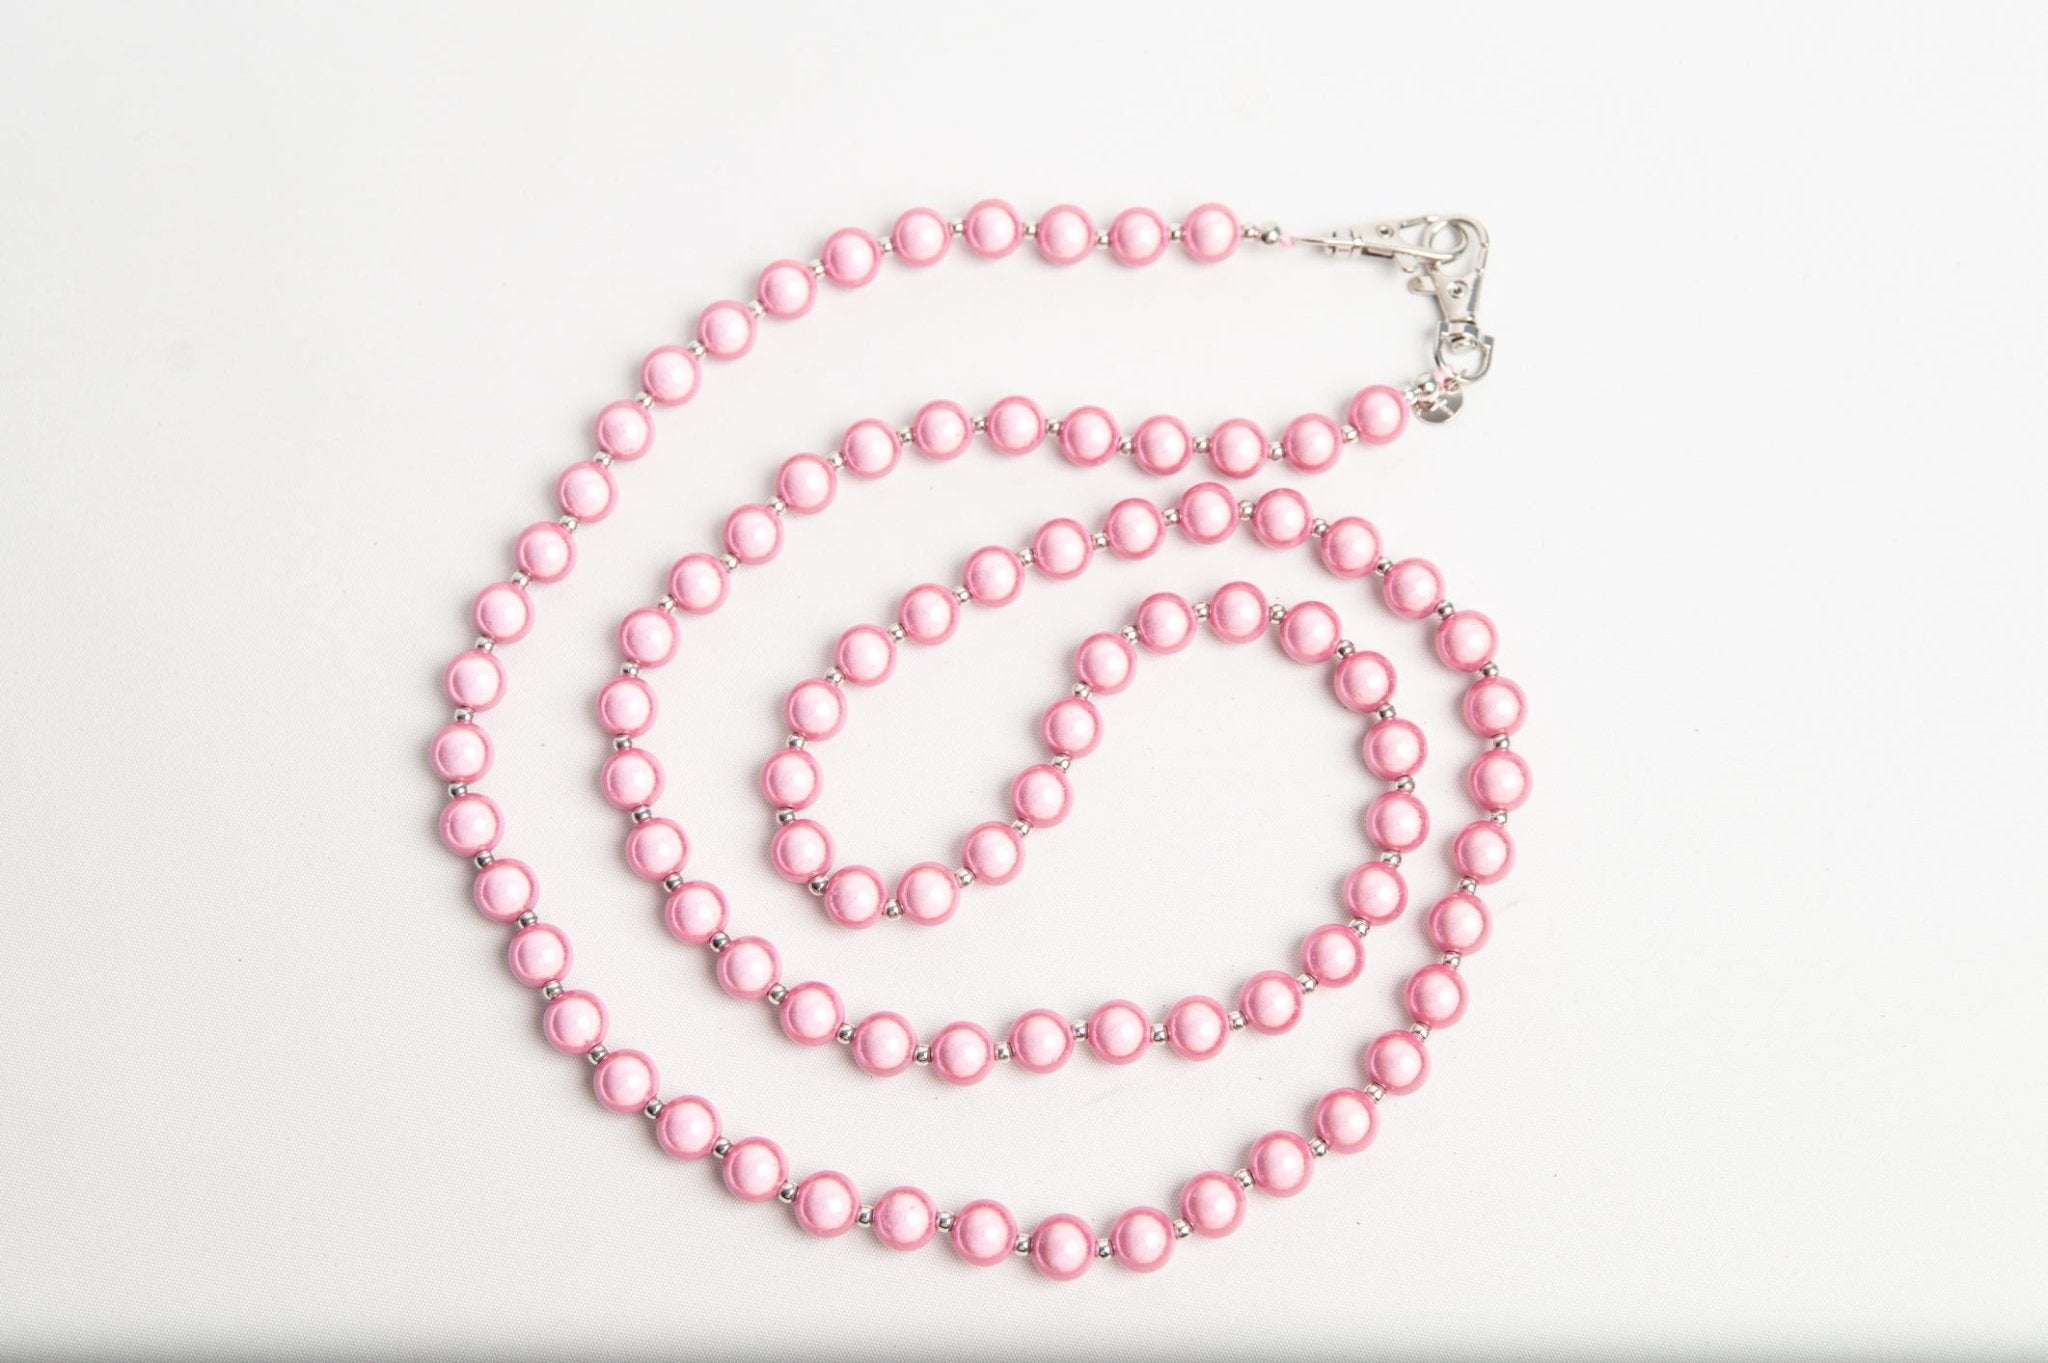 Handy necklace rose - Peggell